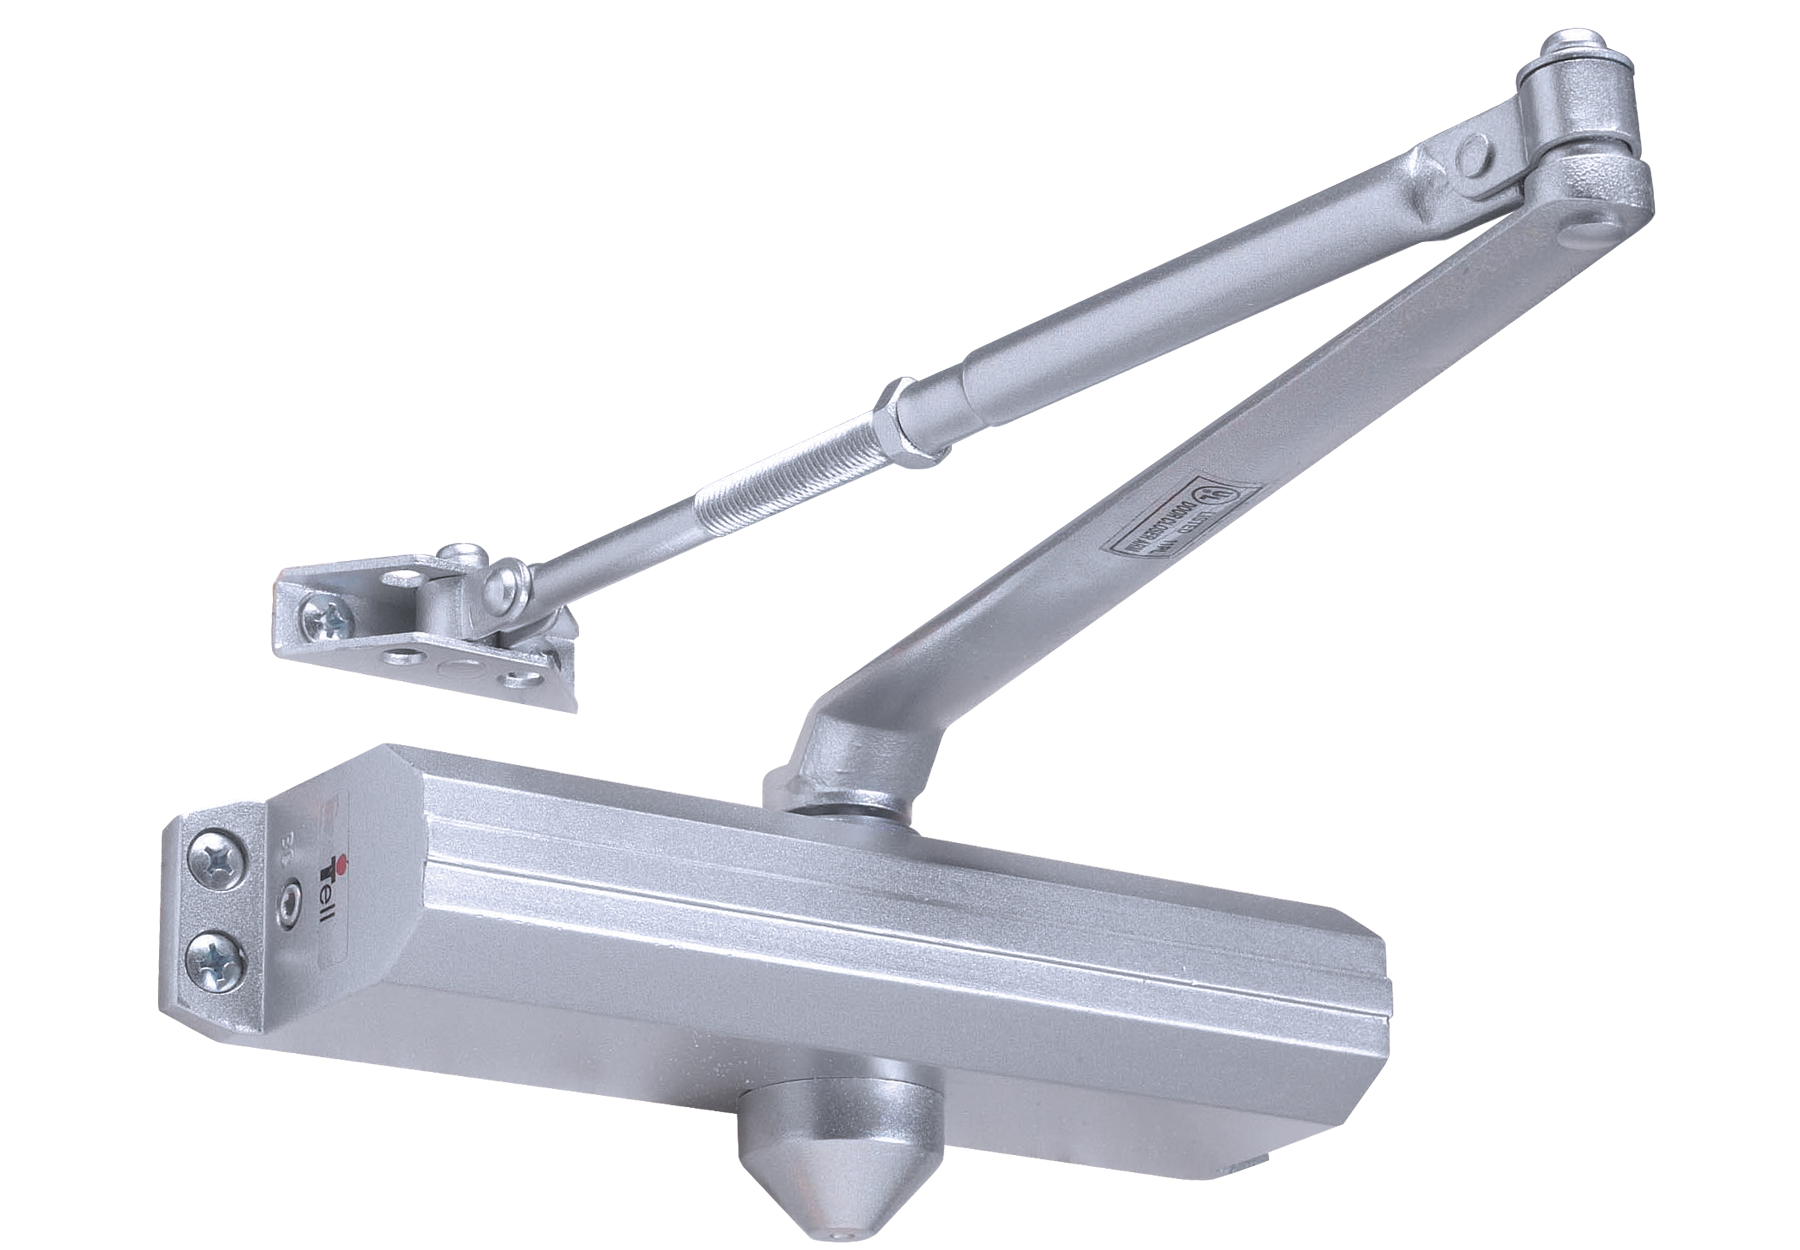 Open arm Surface Door Closers with Full cover Dexter Commercial Hardware DCH1000-STD-FULL-HW/PA-ALUM 689/ALUM Heavy Duty Hold Aluminum Allegion 